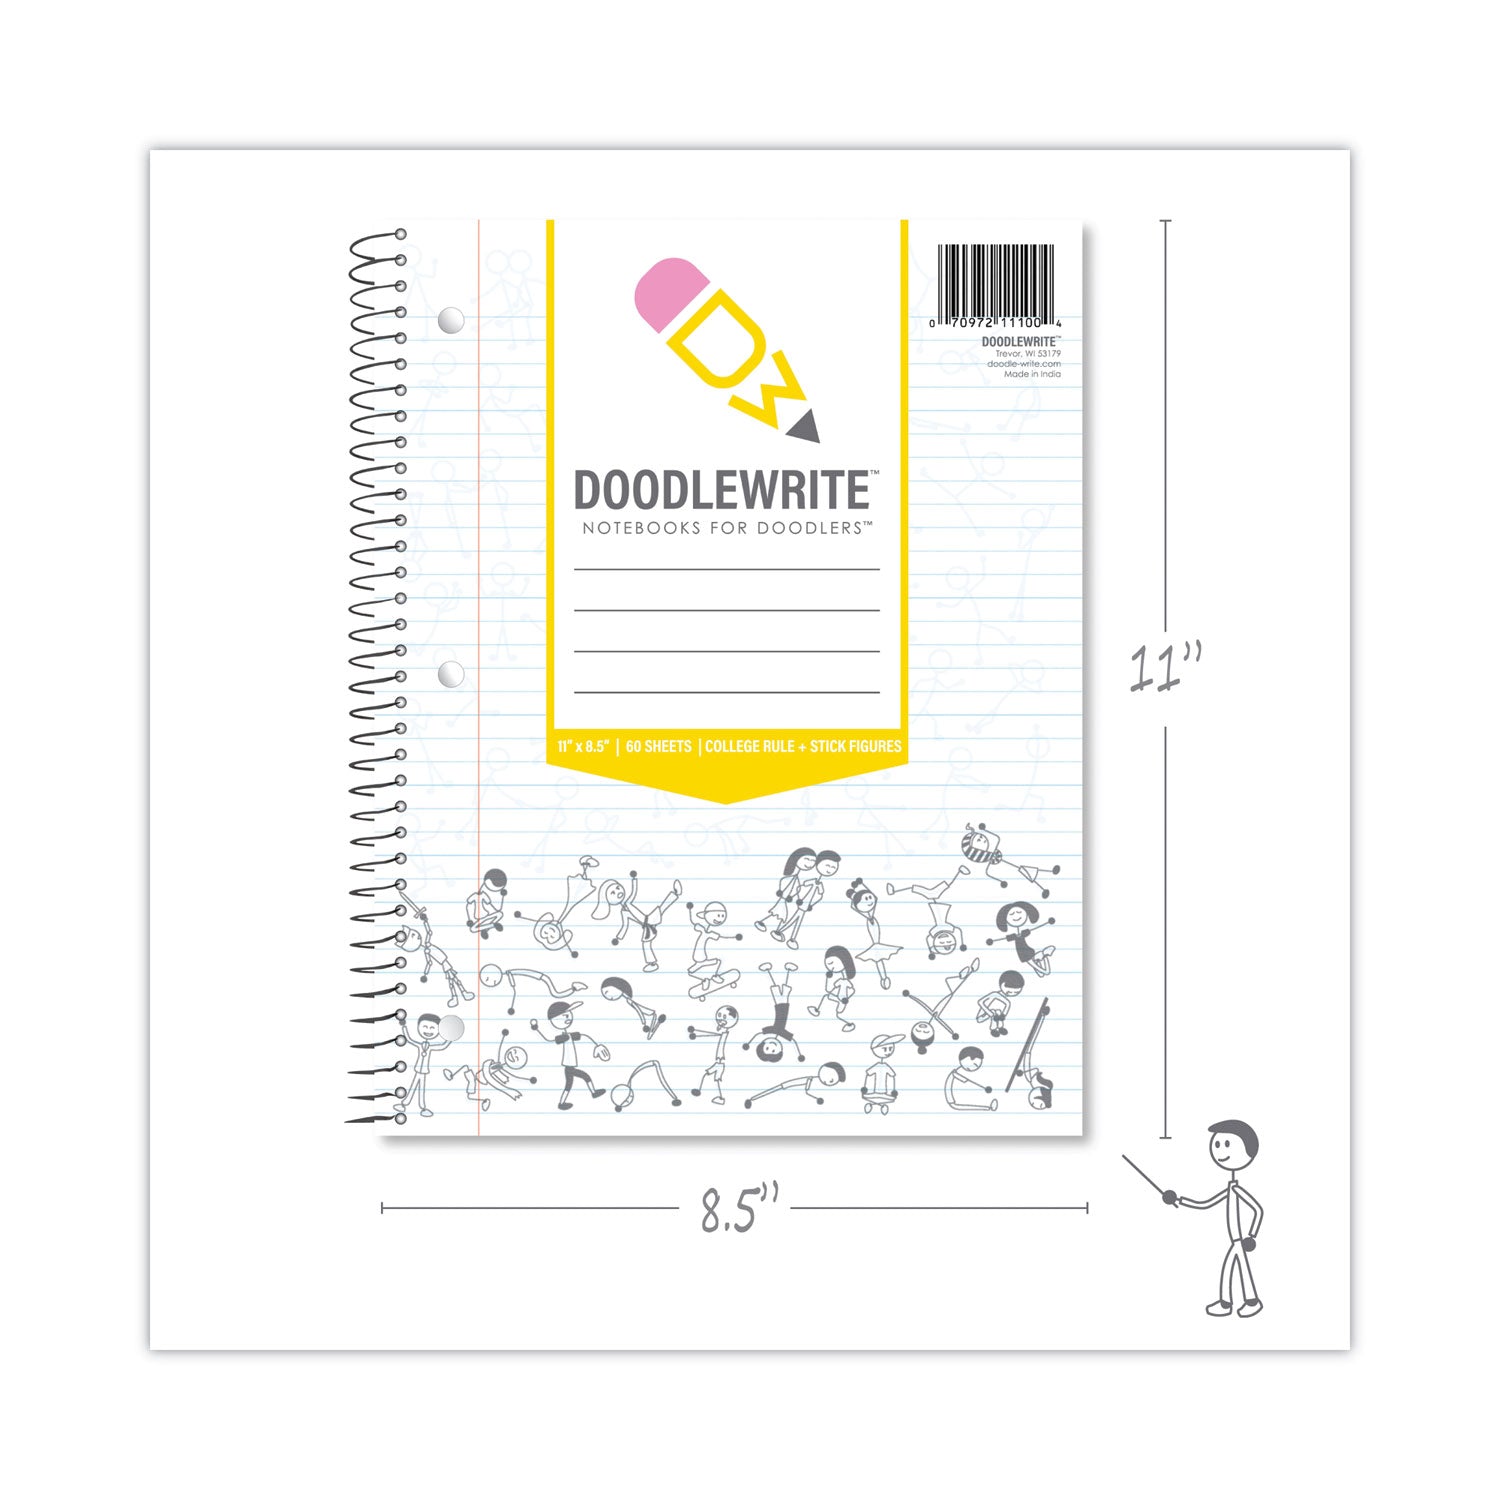 doodlewrite-notebooks-1-subject-medium-college-rule-white-cover-60-sheets-24-carton-ships-in-4-6-business-days_roa11100cs - 2